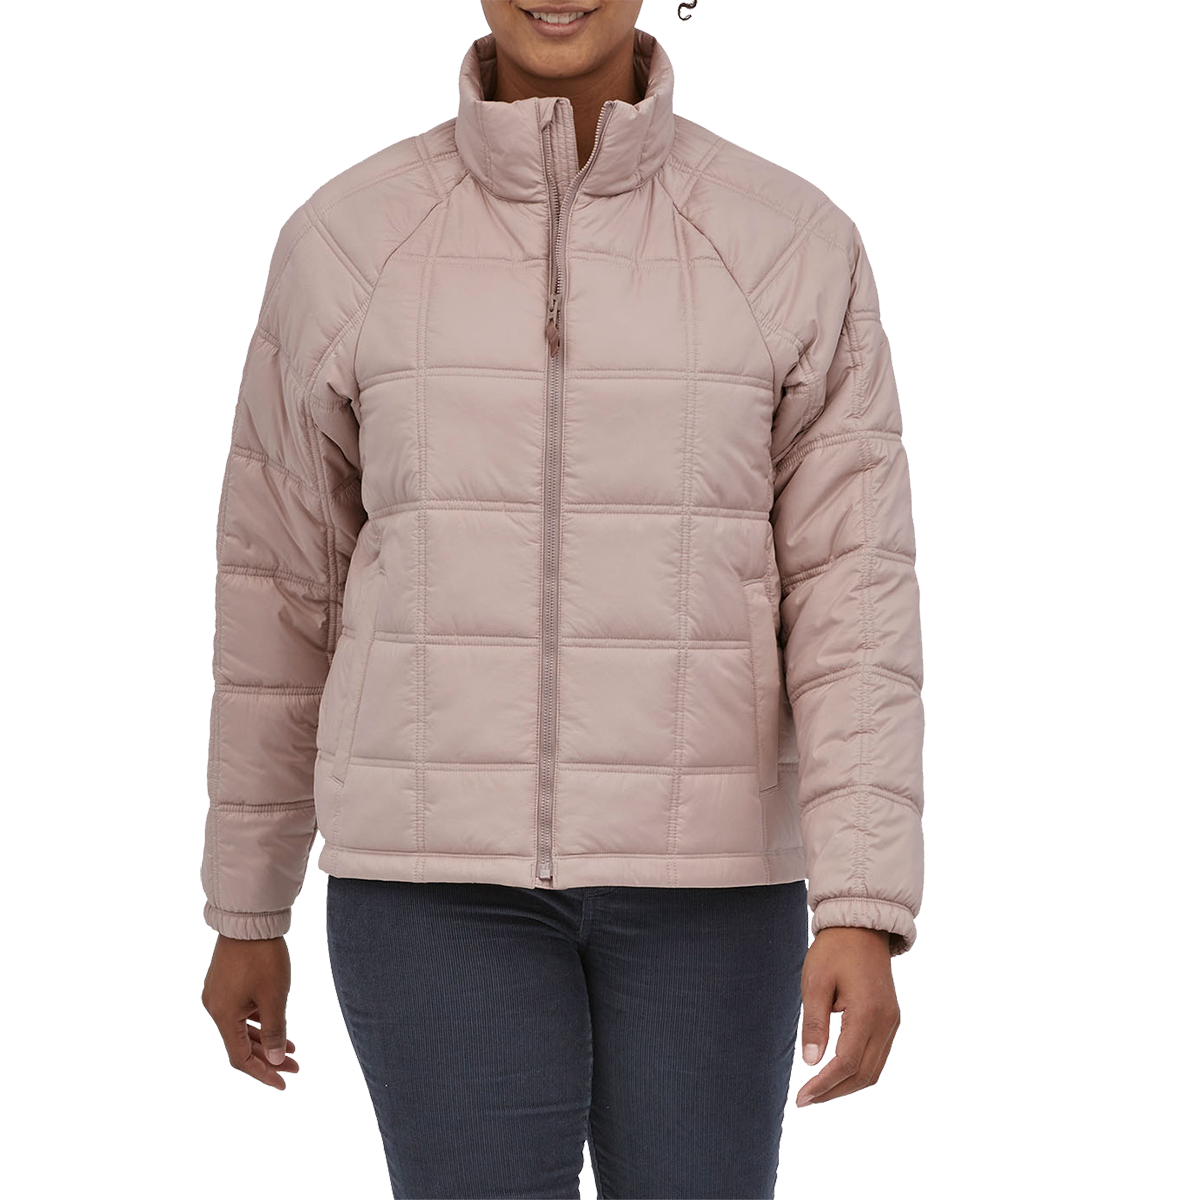 Women's Lost Canyon Jacket alternate view